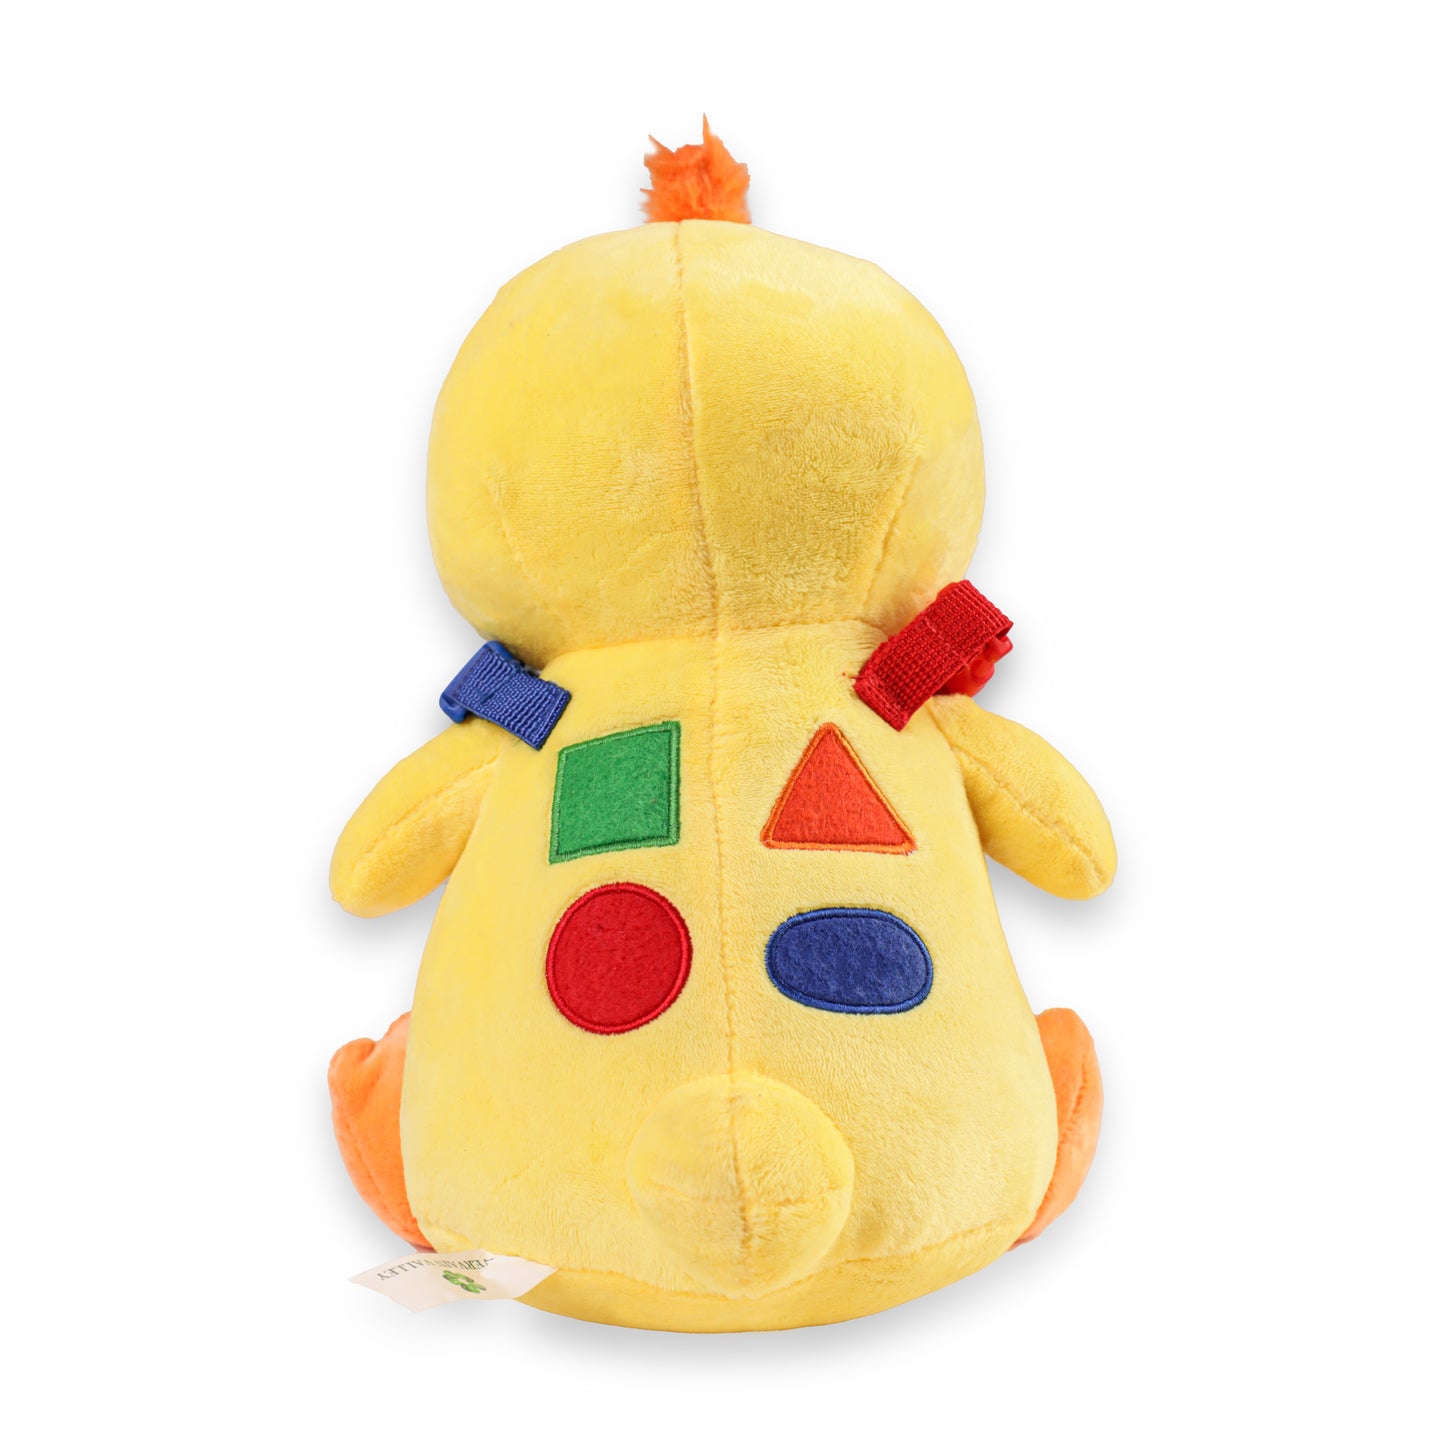 Shows the colorful shapes on the back of Marvin. Great for teaching about shapes.